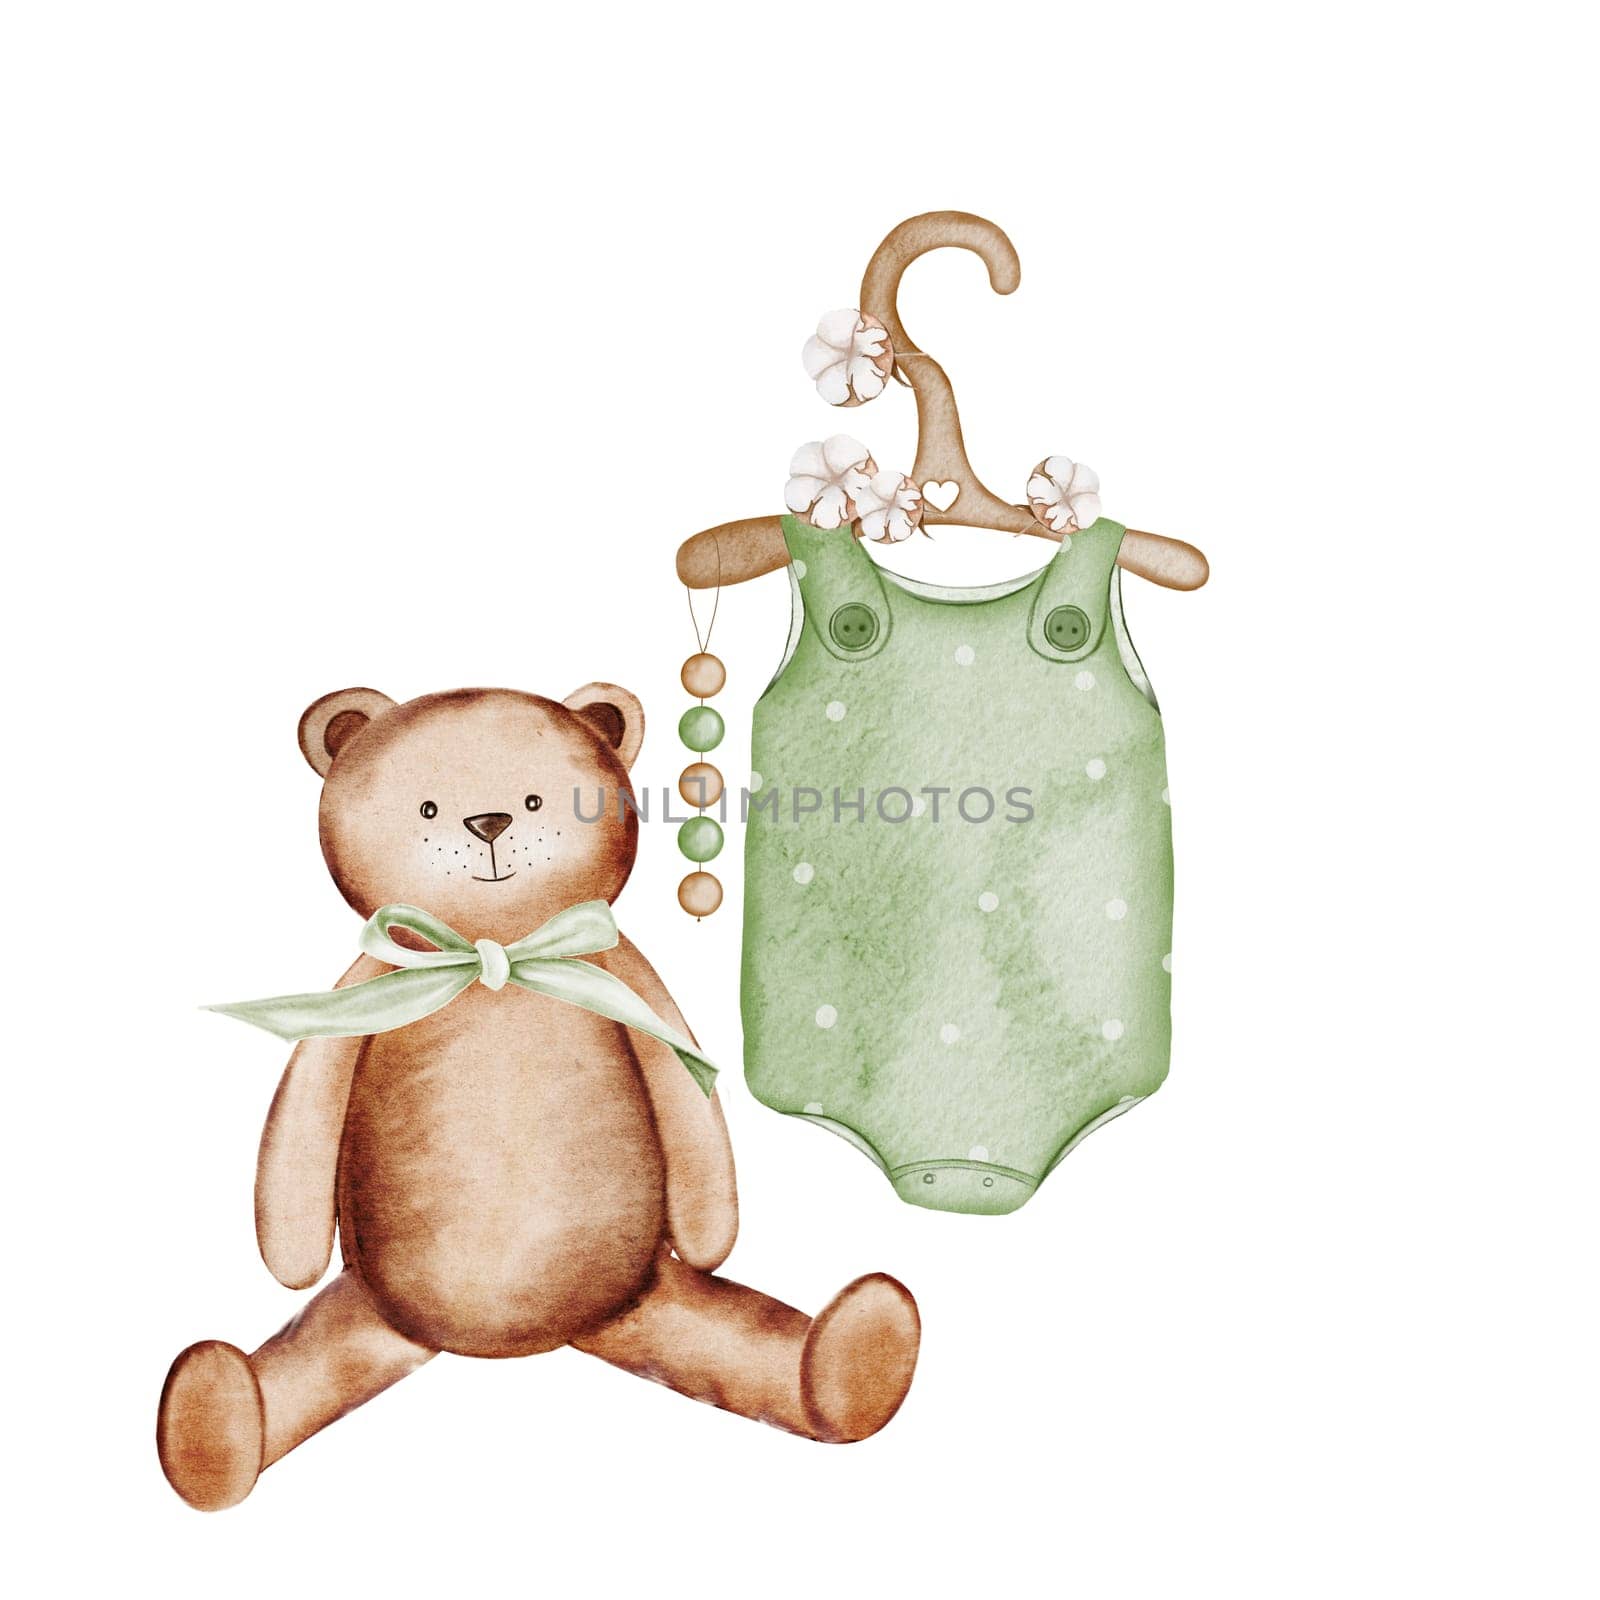 Baby set in vintage style. Watercolor hand drawn set of children's clothes and accessories with a teddy bear. Clip art isolated on white background. Ideal for designing baby shower and birthday invitations and cards. High quality illustration